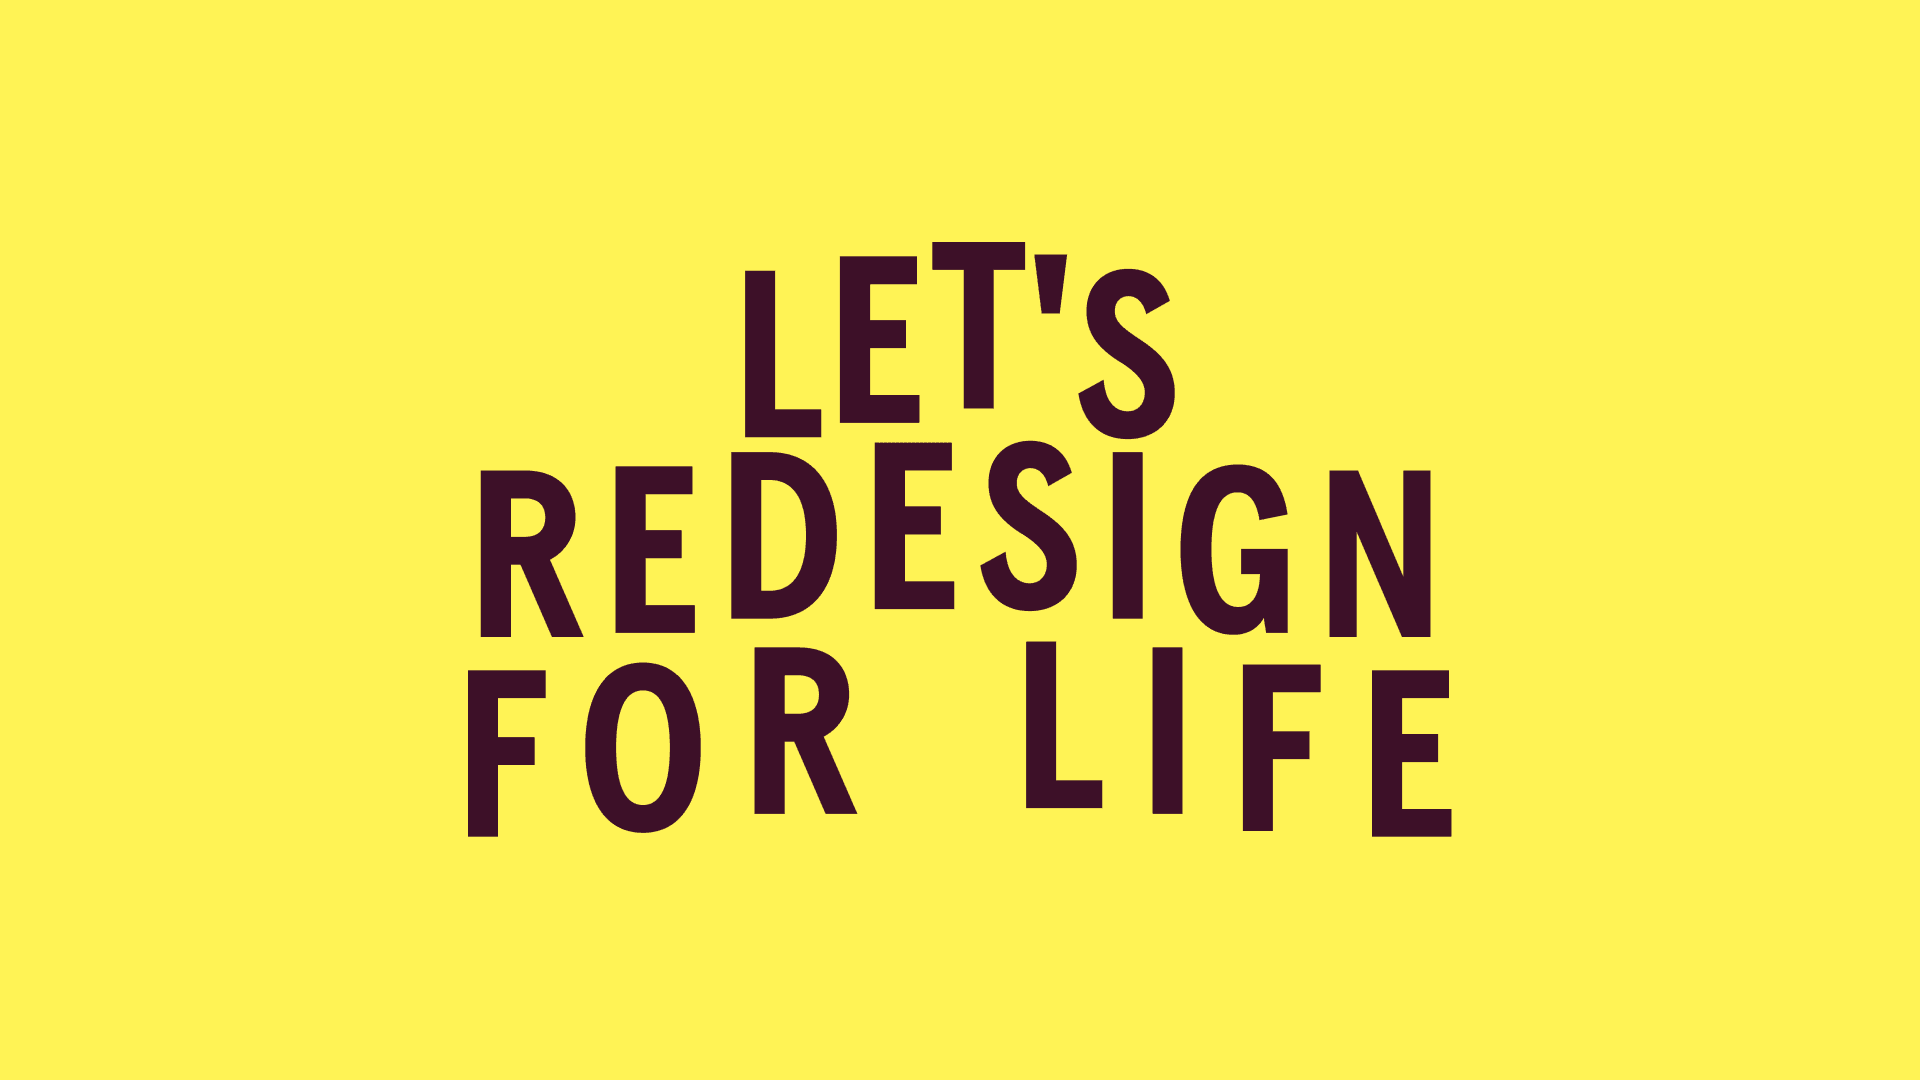 Norday slogan 'Let's redesign for life'